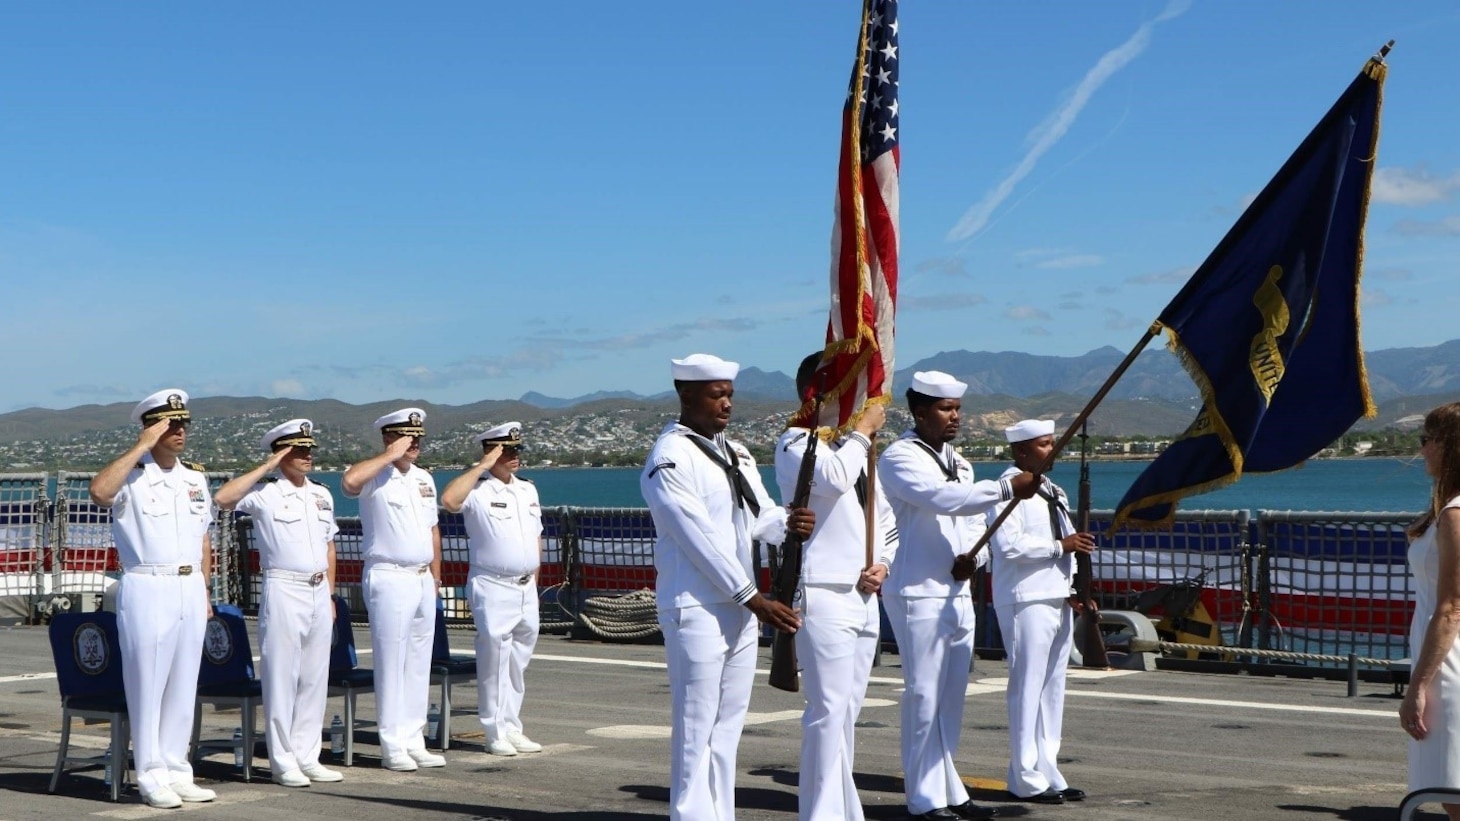 The color guard parades the colors during a change of command ceremony aboard the Freedom-variant littoral combat ship USS Wichita (LCS 13) as Cmdr. Eric Meyers relieves Cmdr. Daniel Reiher as commanding officer in Ponce, Puerto Rico, June 10, 2022. Wichita is in the U.S. 4th Fleet operating area (OPAREA) in support of the Joint Interagency Task Force-South’s counter-narcotics mission.